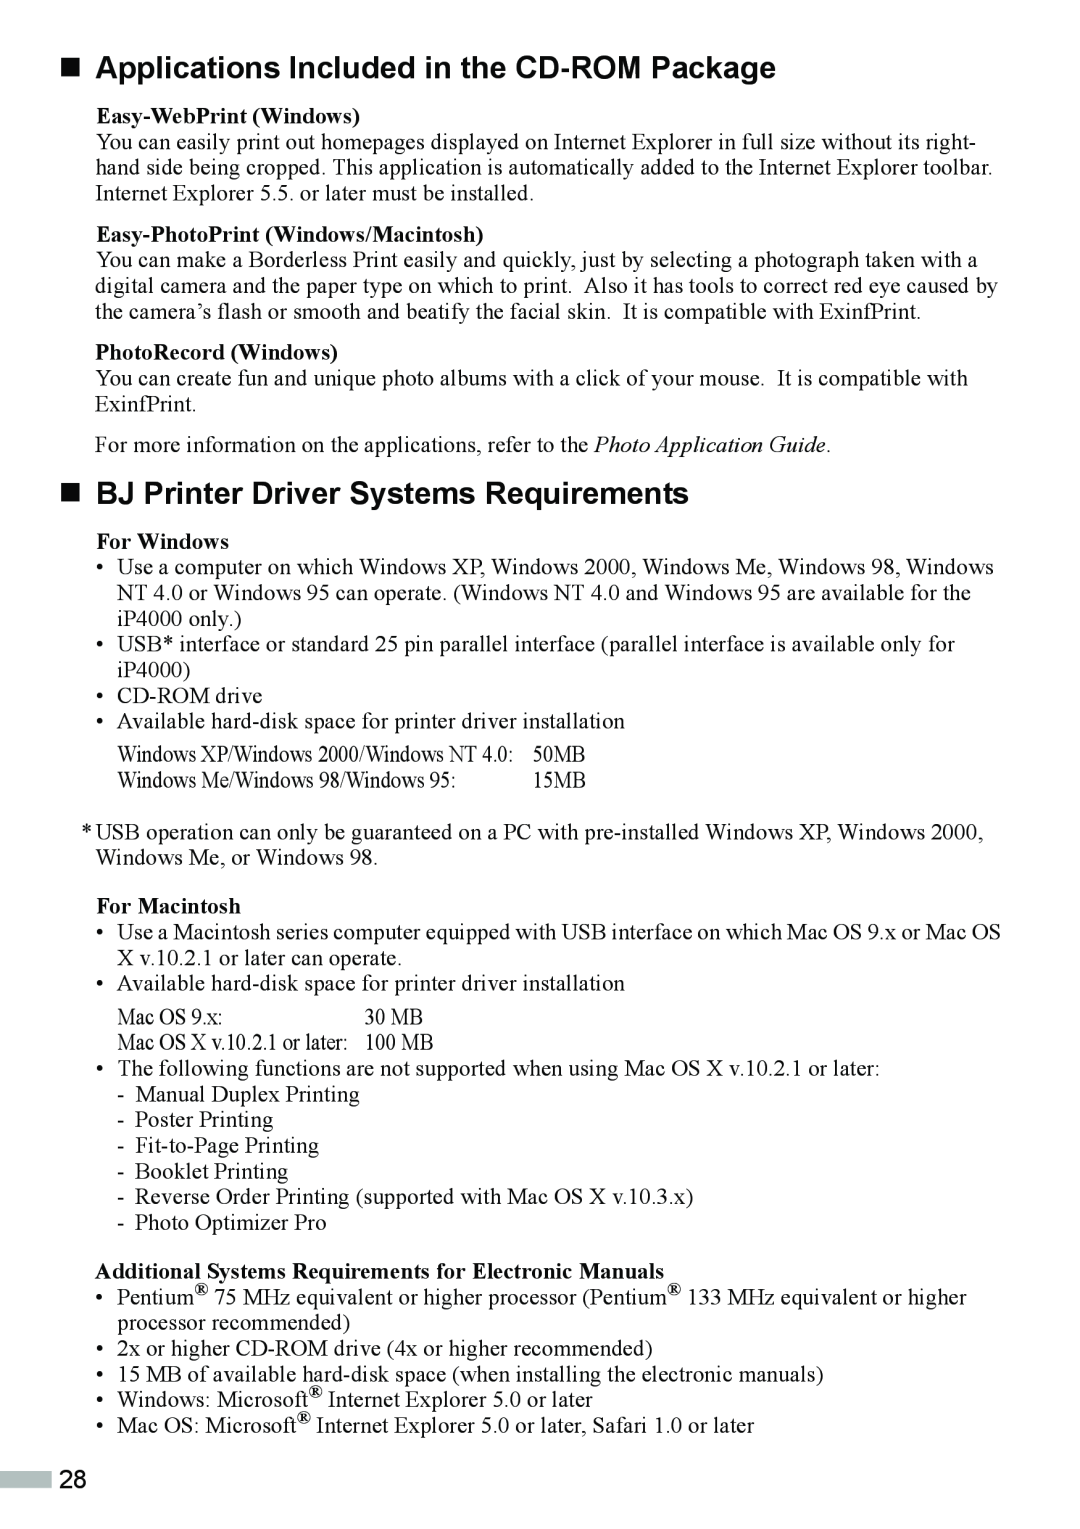 Canon ip3000 „Applications Included in the CD-ROMPackage, „BJ Printer Driver Systems Requirements, Easy-WebPrintWindows 